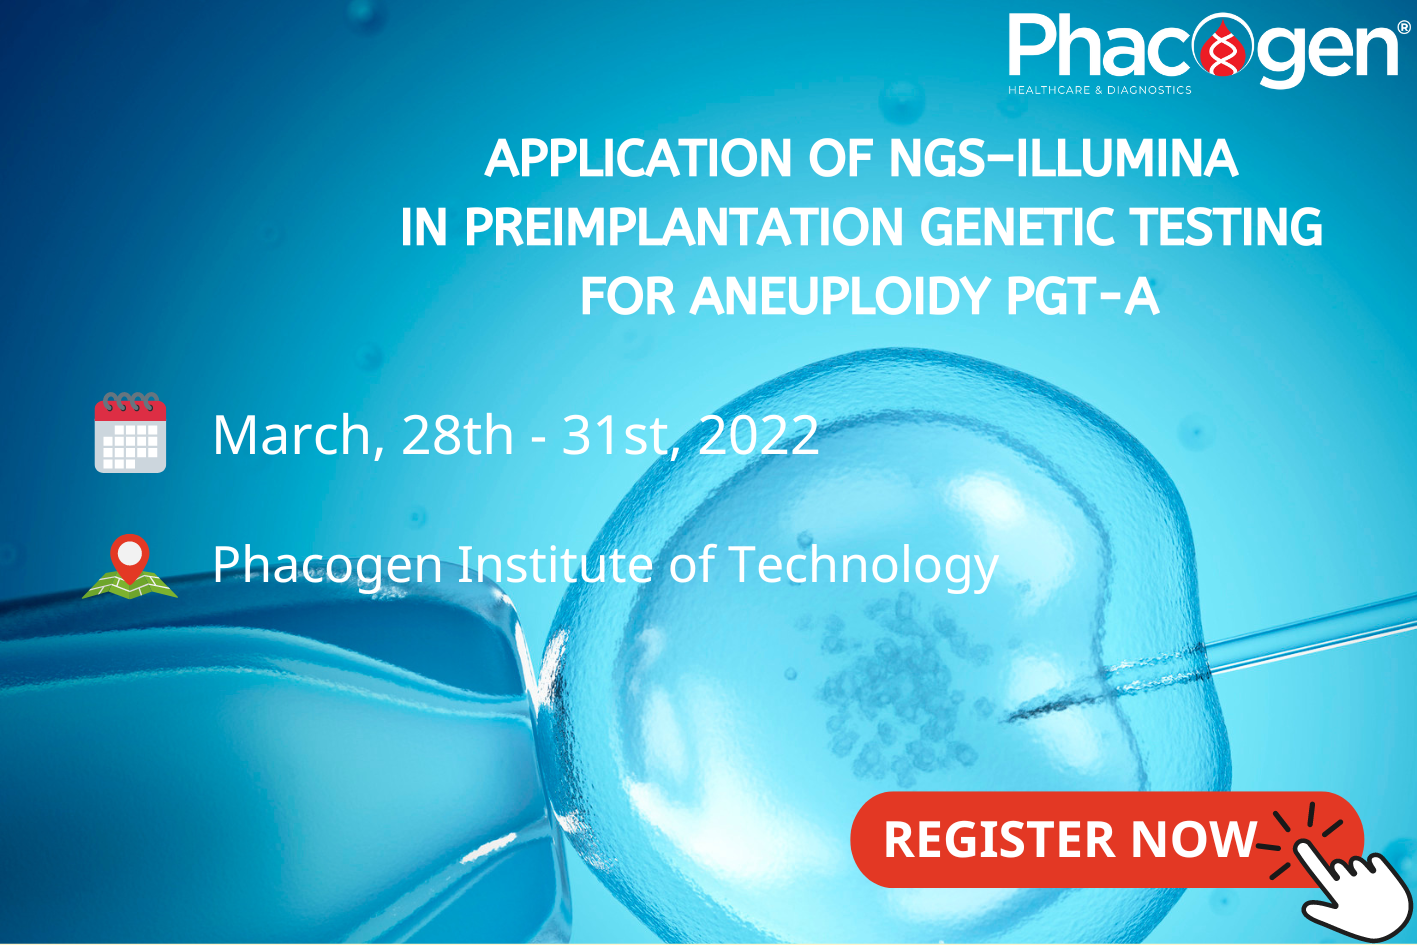 Application of NGS-Illumina in preimplantation genetic testing for Aneuploidy PGT-A